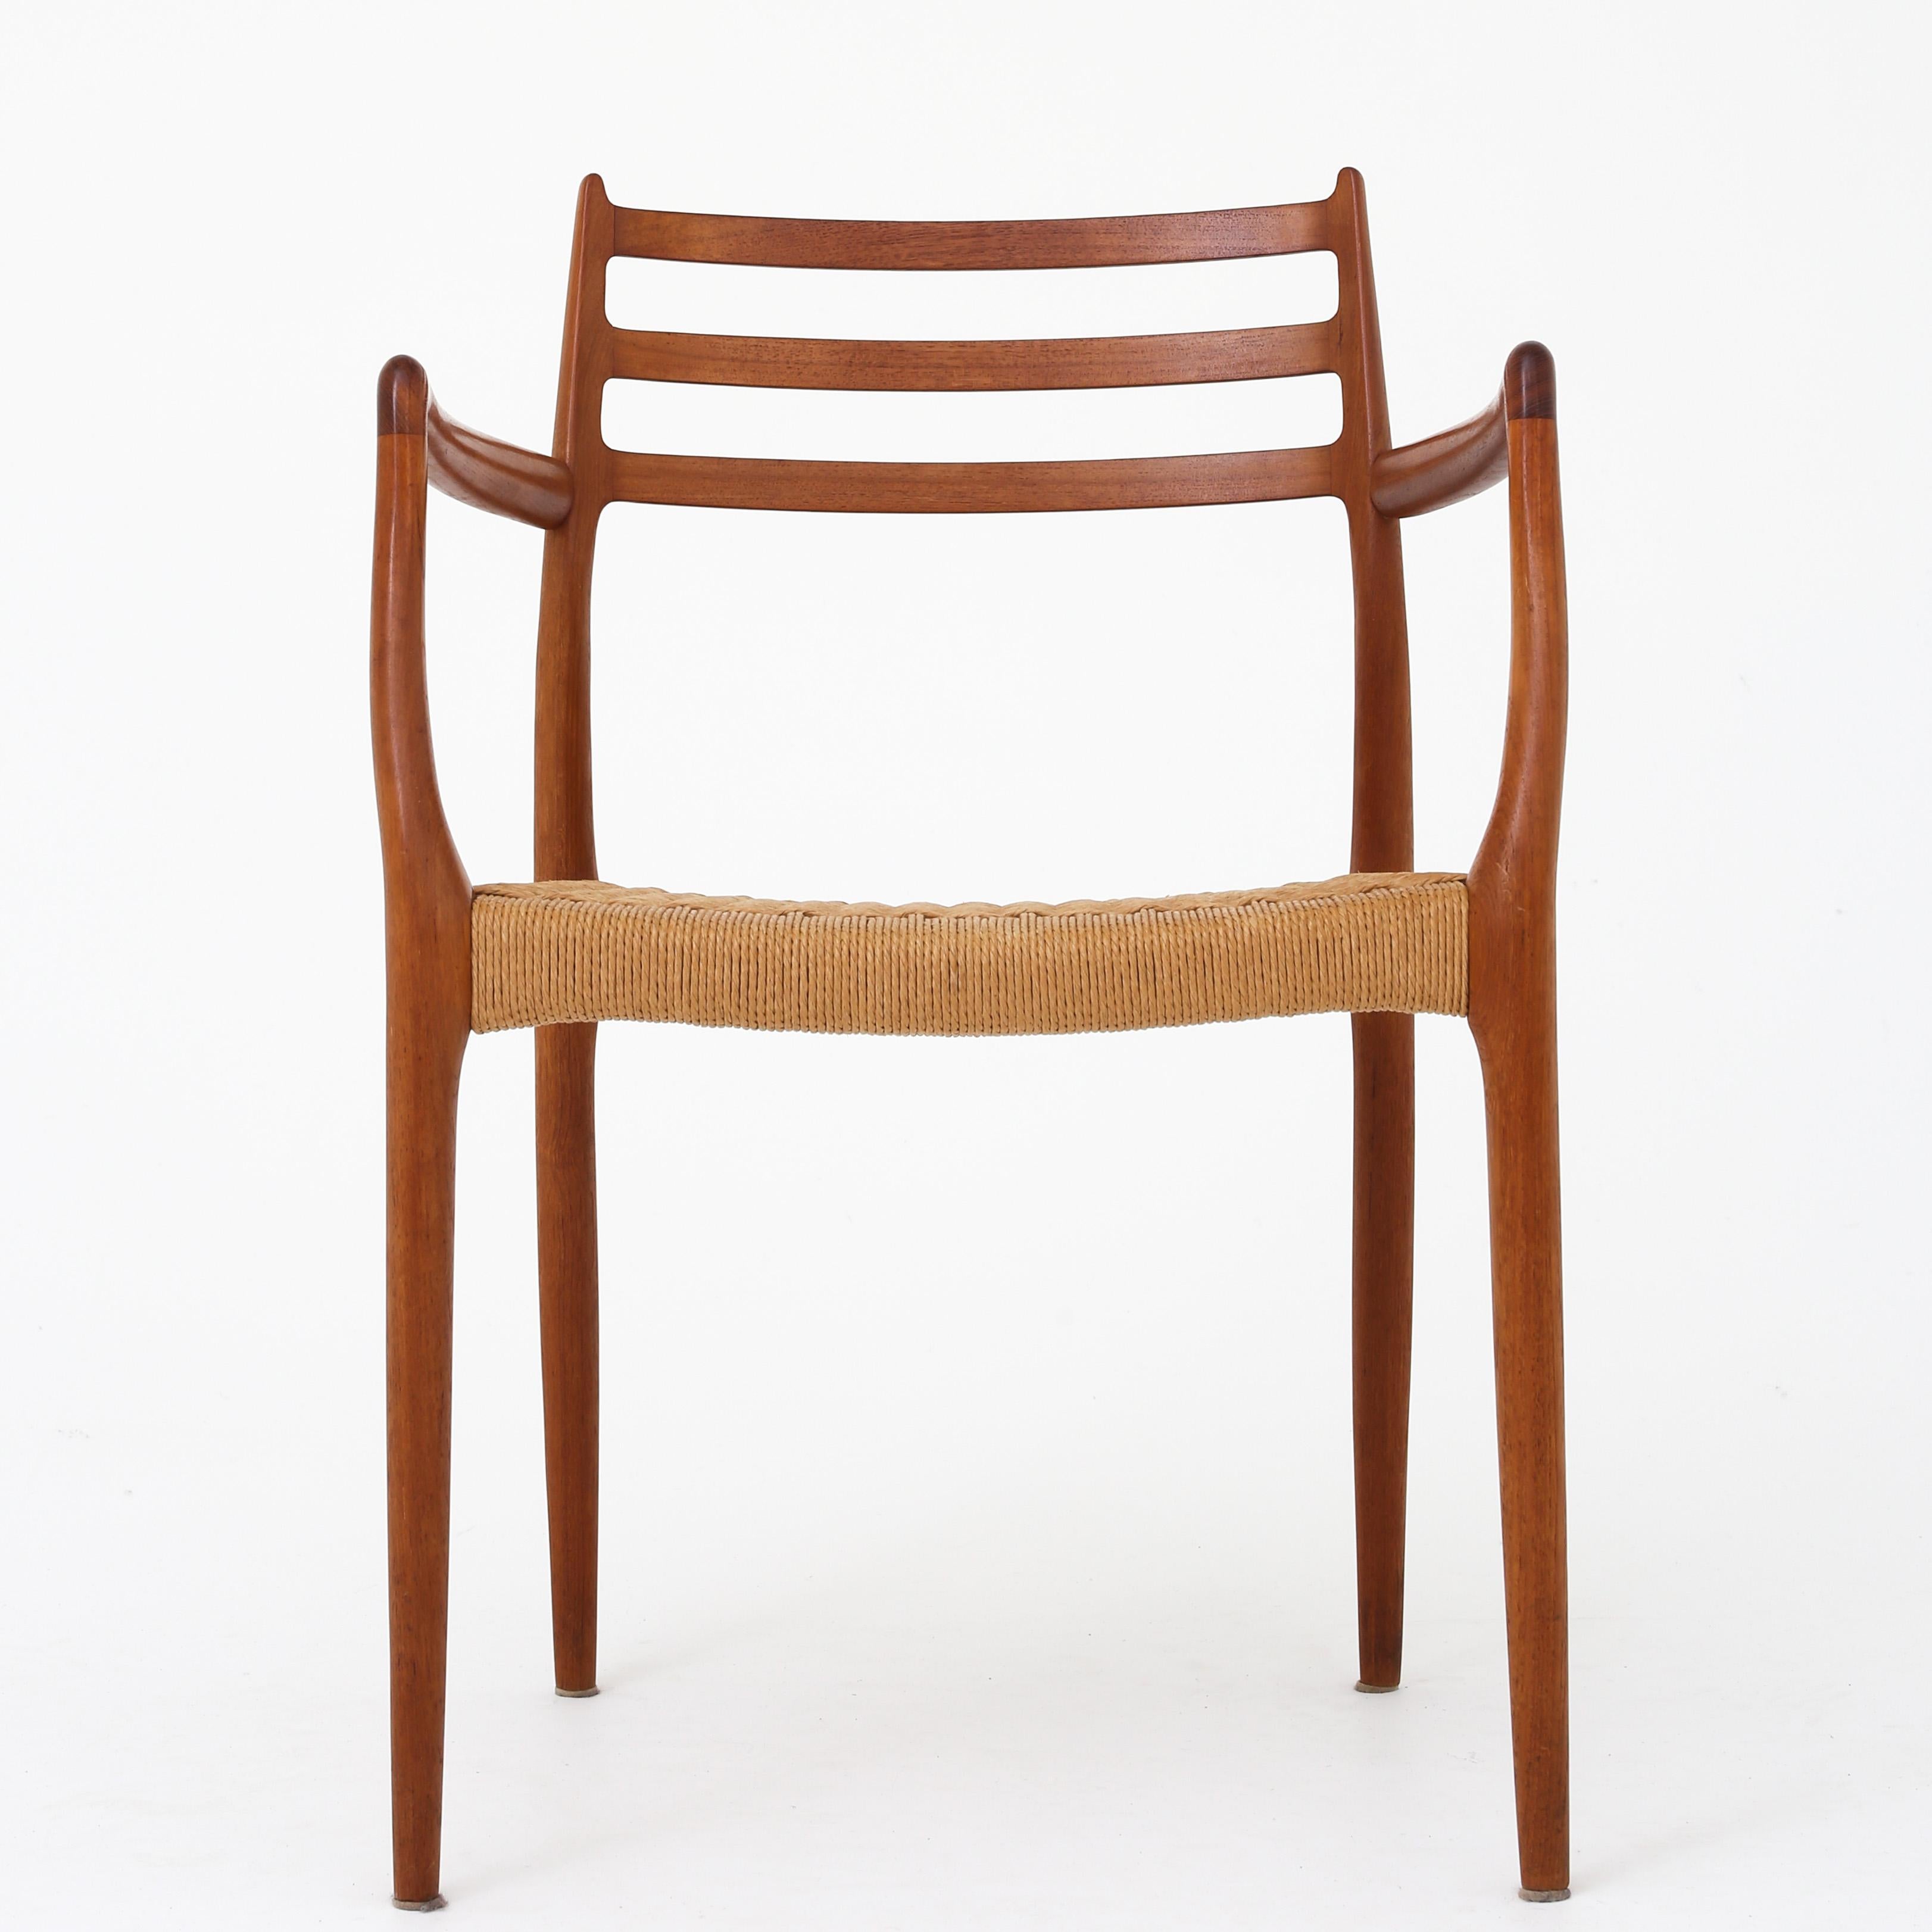 Niels O Møller / J.L Møller. NO 62 - Set of 6 armchairs in solid teak and seat in woven paper yarn. Designed in 1962.